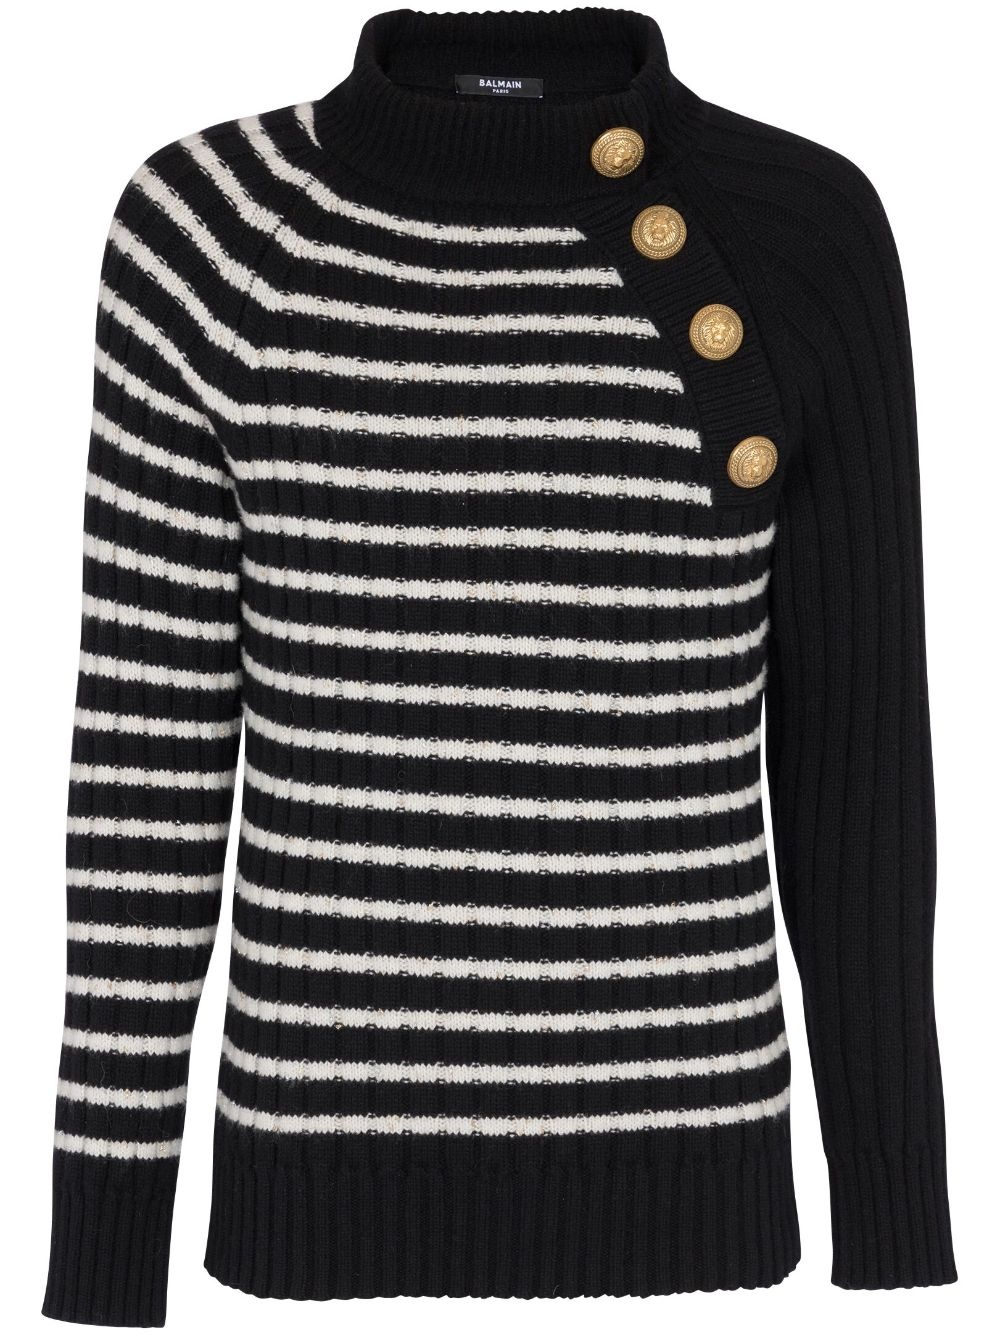 embossed-button striped jumper - 1